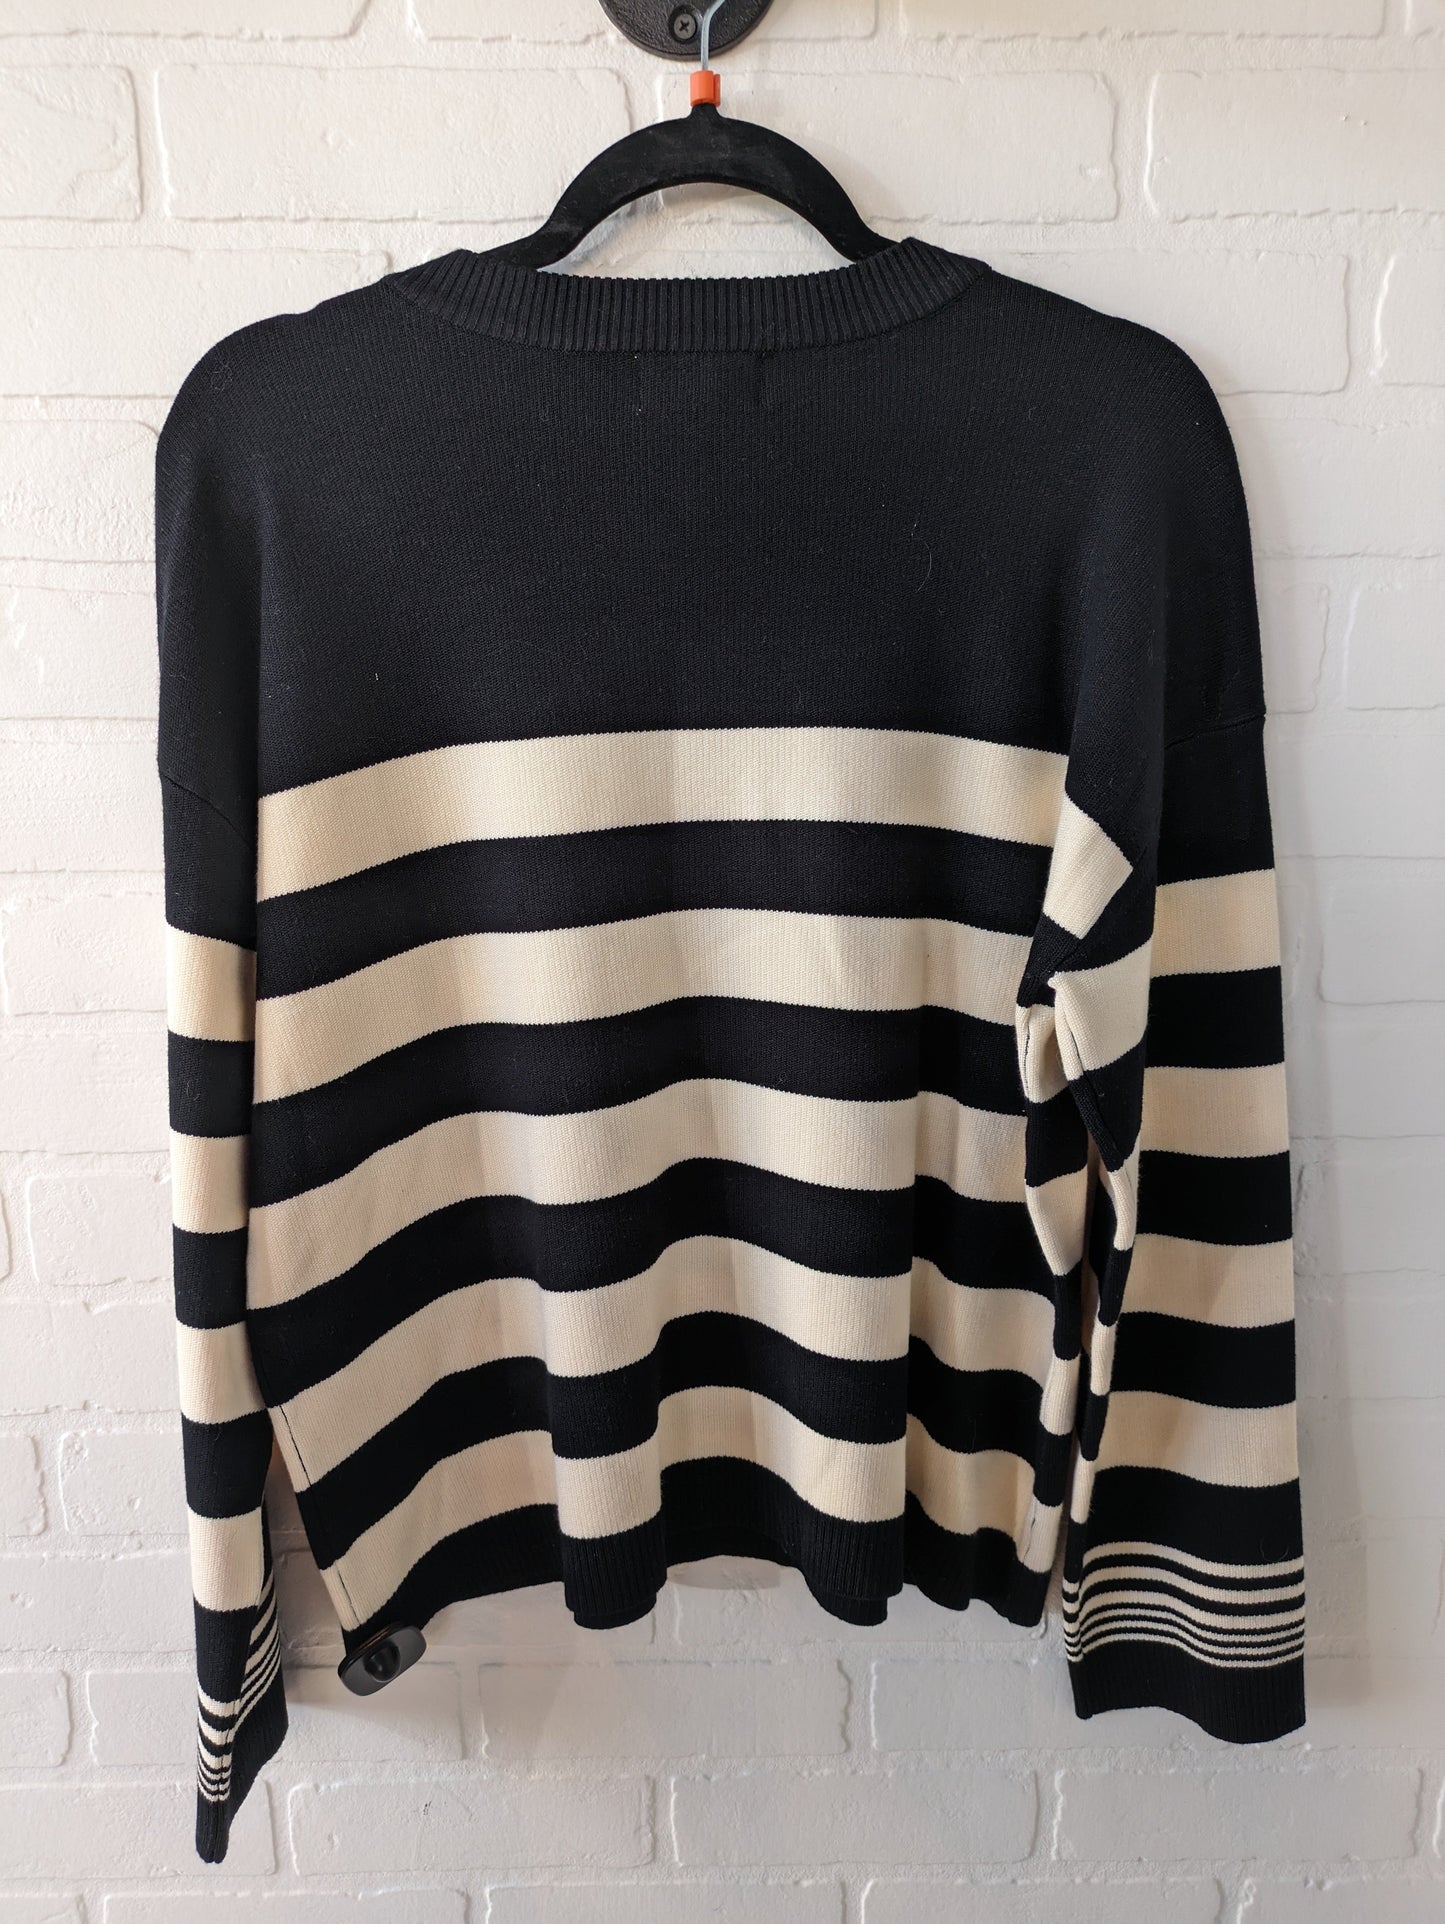 Sweater By Cmc  Size: L